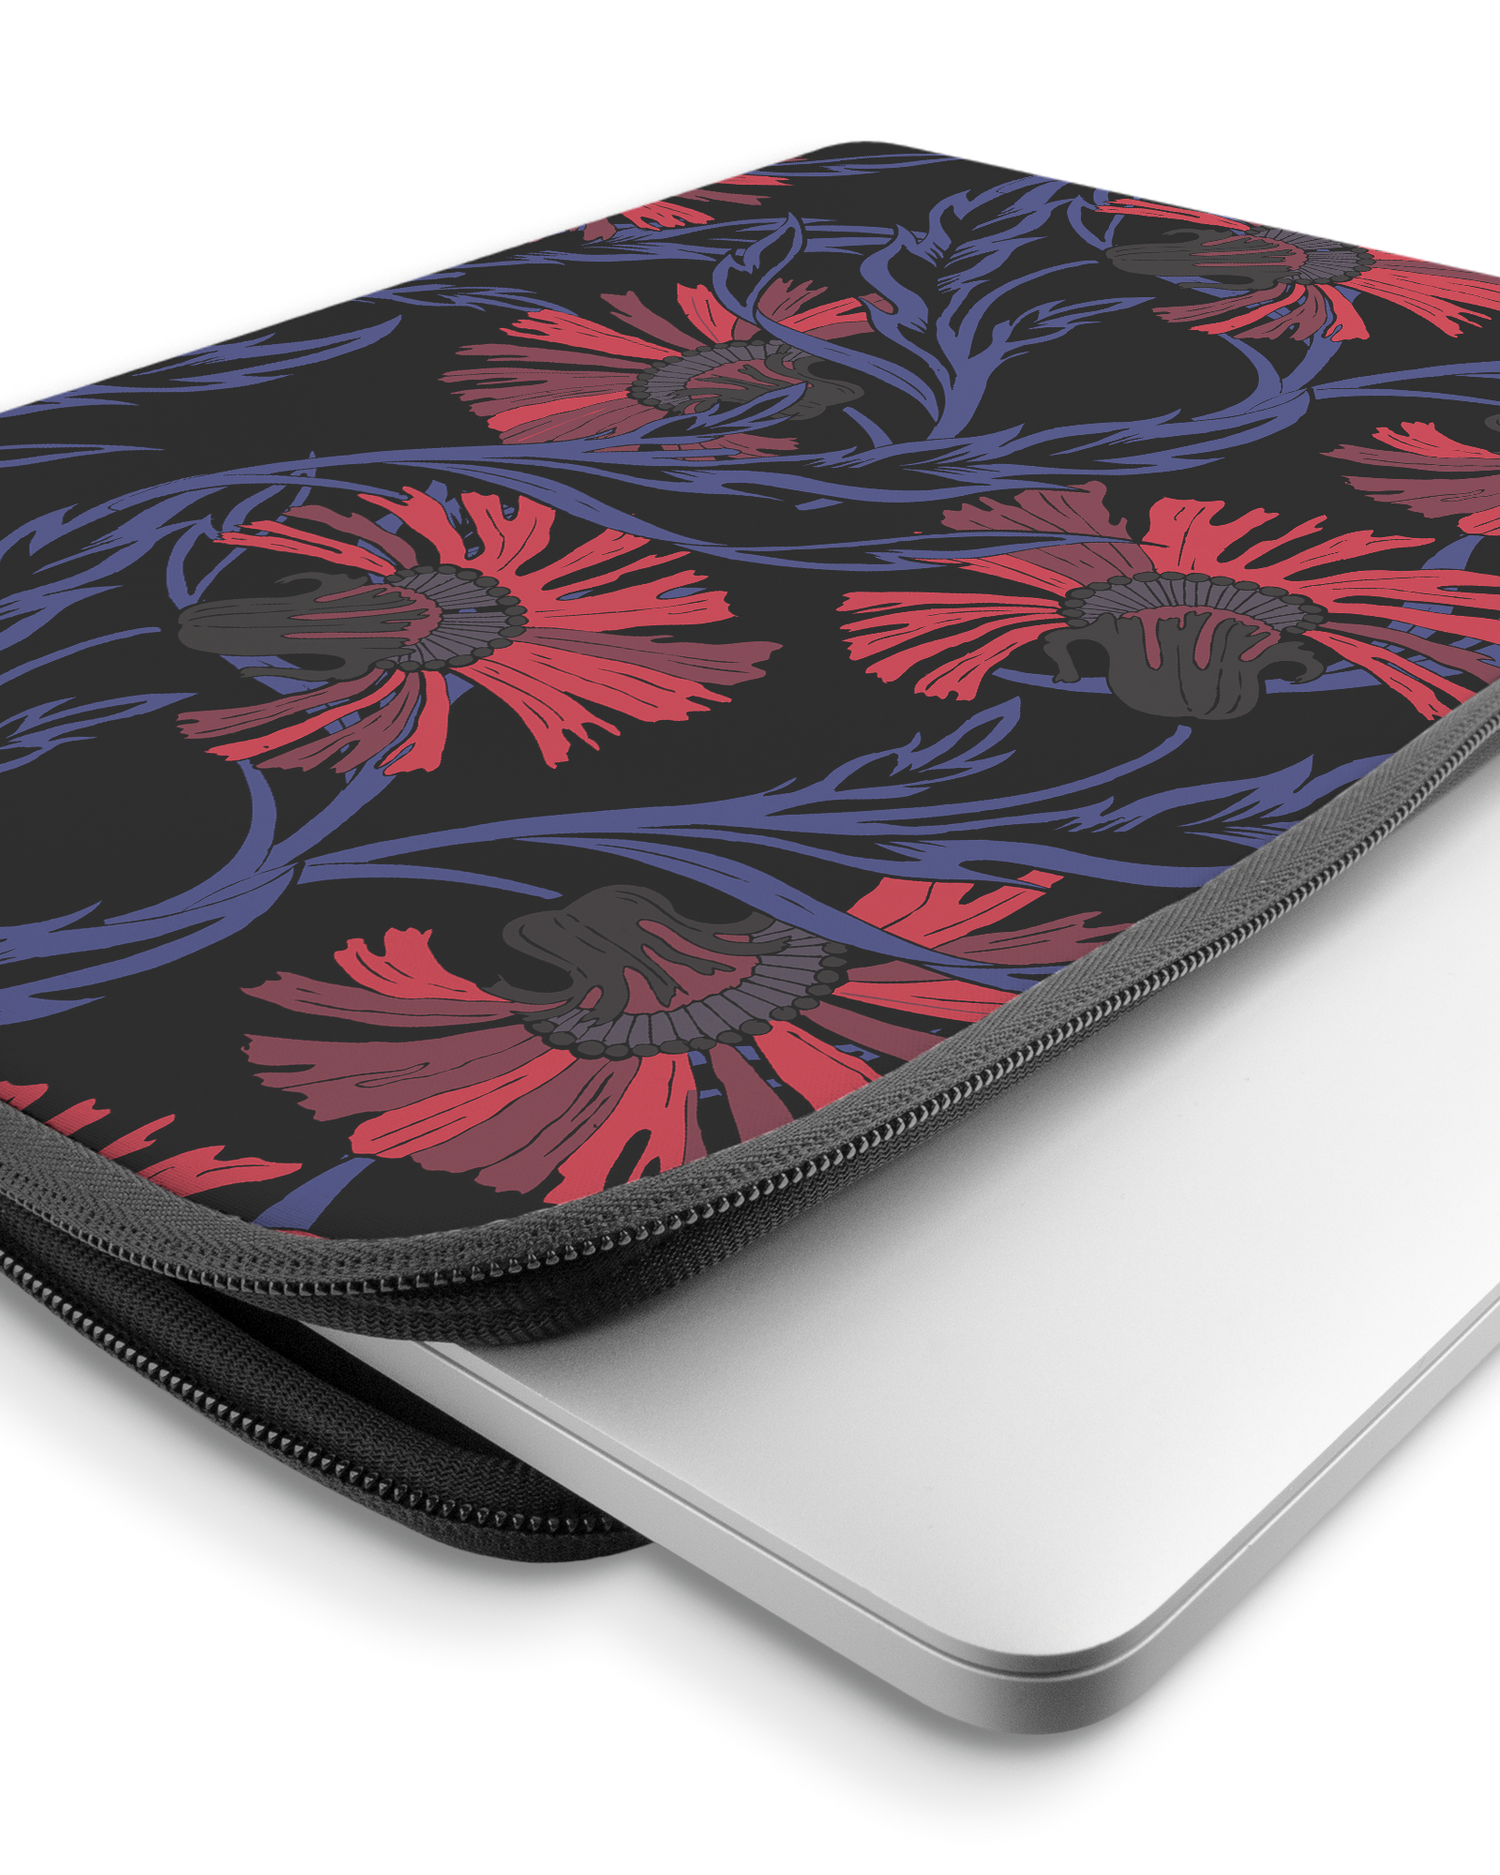 Midnight Floral Laptop Case 15-16 inch with device inside